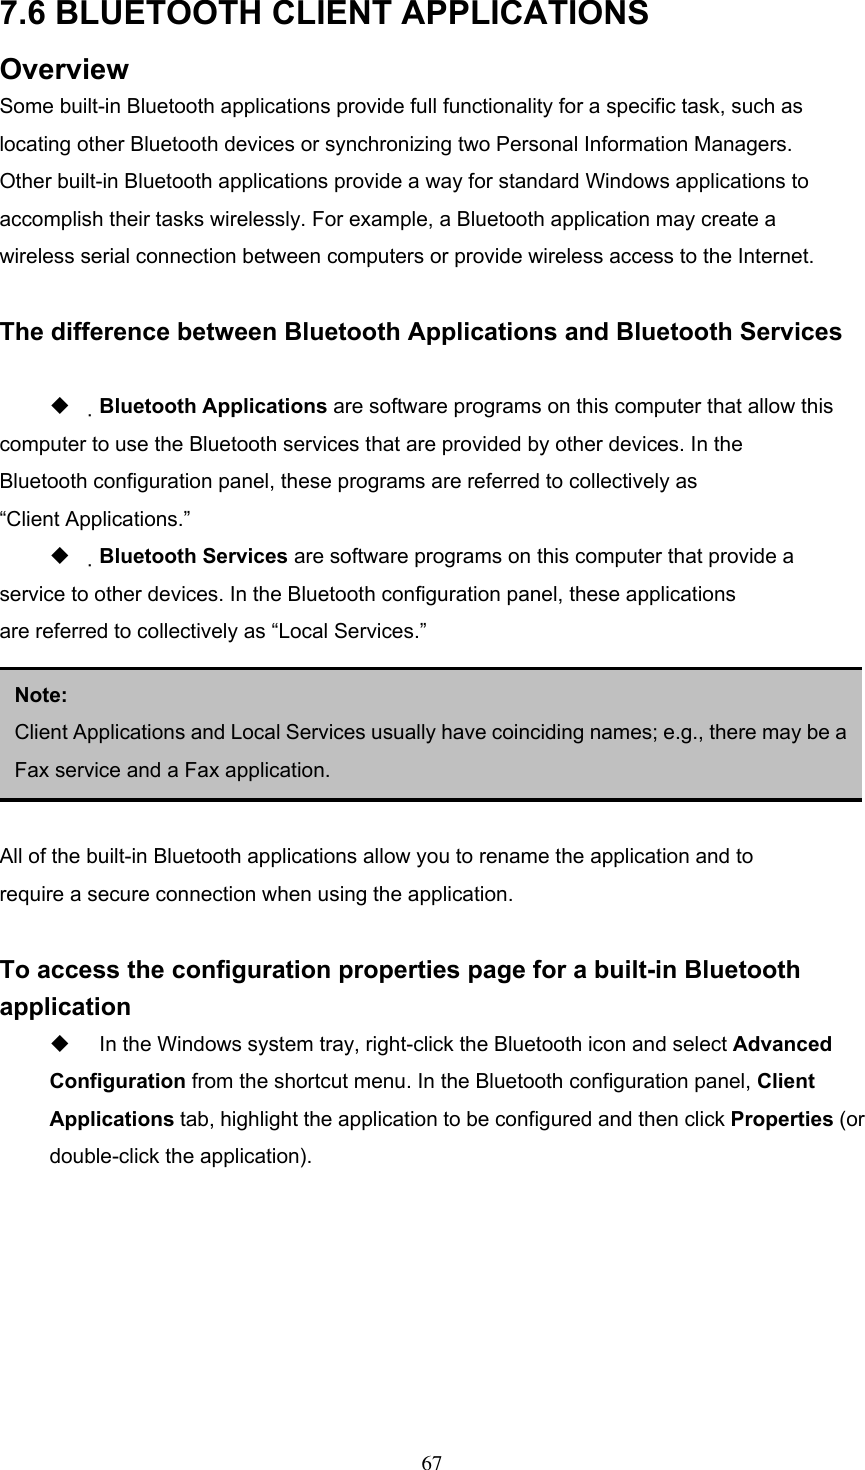 7.6 BLUETOOTH CLIENT APPLICATIONS Overview Some built-in Bluetooth applications provide full functionality for a specific task, such as locating other Bluetooth devices or synchronizing two Personal Information Managers. Other built-in Bluetooth applications provide a way for standard Windows applications to accomplish their tasks wirelessly. For example, a Bluetooth application may create a wireless serial connection between computers or provide wireless access to the Internet.  The difference between Bluetooth Applications and Bluetooth Services    Bluetooth Applications are software programs on this computer that allow this computer to use the Bluetooth services that are provided by other devices. In the Bluetooth configuration panel, these programs are referred to collectively as “Client Applications.”   Bluetooth Services are software programs on this computer that provide a service to other devices. In the Bluetooth configuration panel, these applications are referred to collectively as “Local Services.”    3.5.2 General Configuration  Note:  Client Applications and Local Services usually have coinciding names; e.g., there may be aFax service and a Fax application. All of the built-in Bluetooth applications allow you to rename the application and to require a secure connection when using the application.  To access the configuration properties page for a built-in Bluetooth application   In the Windows system tray, right-click the Bluetooth icon and select Advanced Configuration from the shortcut menu. In the Bluetooth configuration panel, Client Applications tab, highlight the application to be configured and then click Properties (or double-click the application).  67 